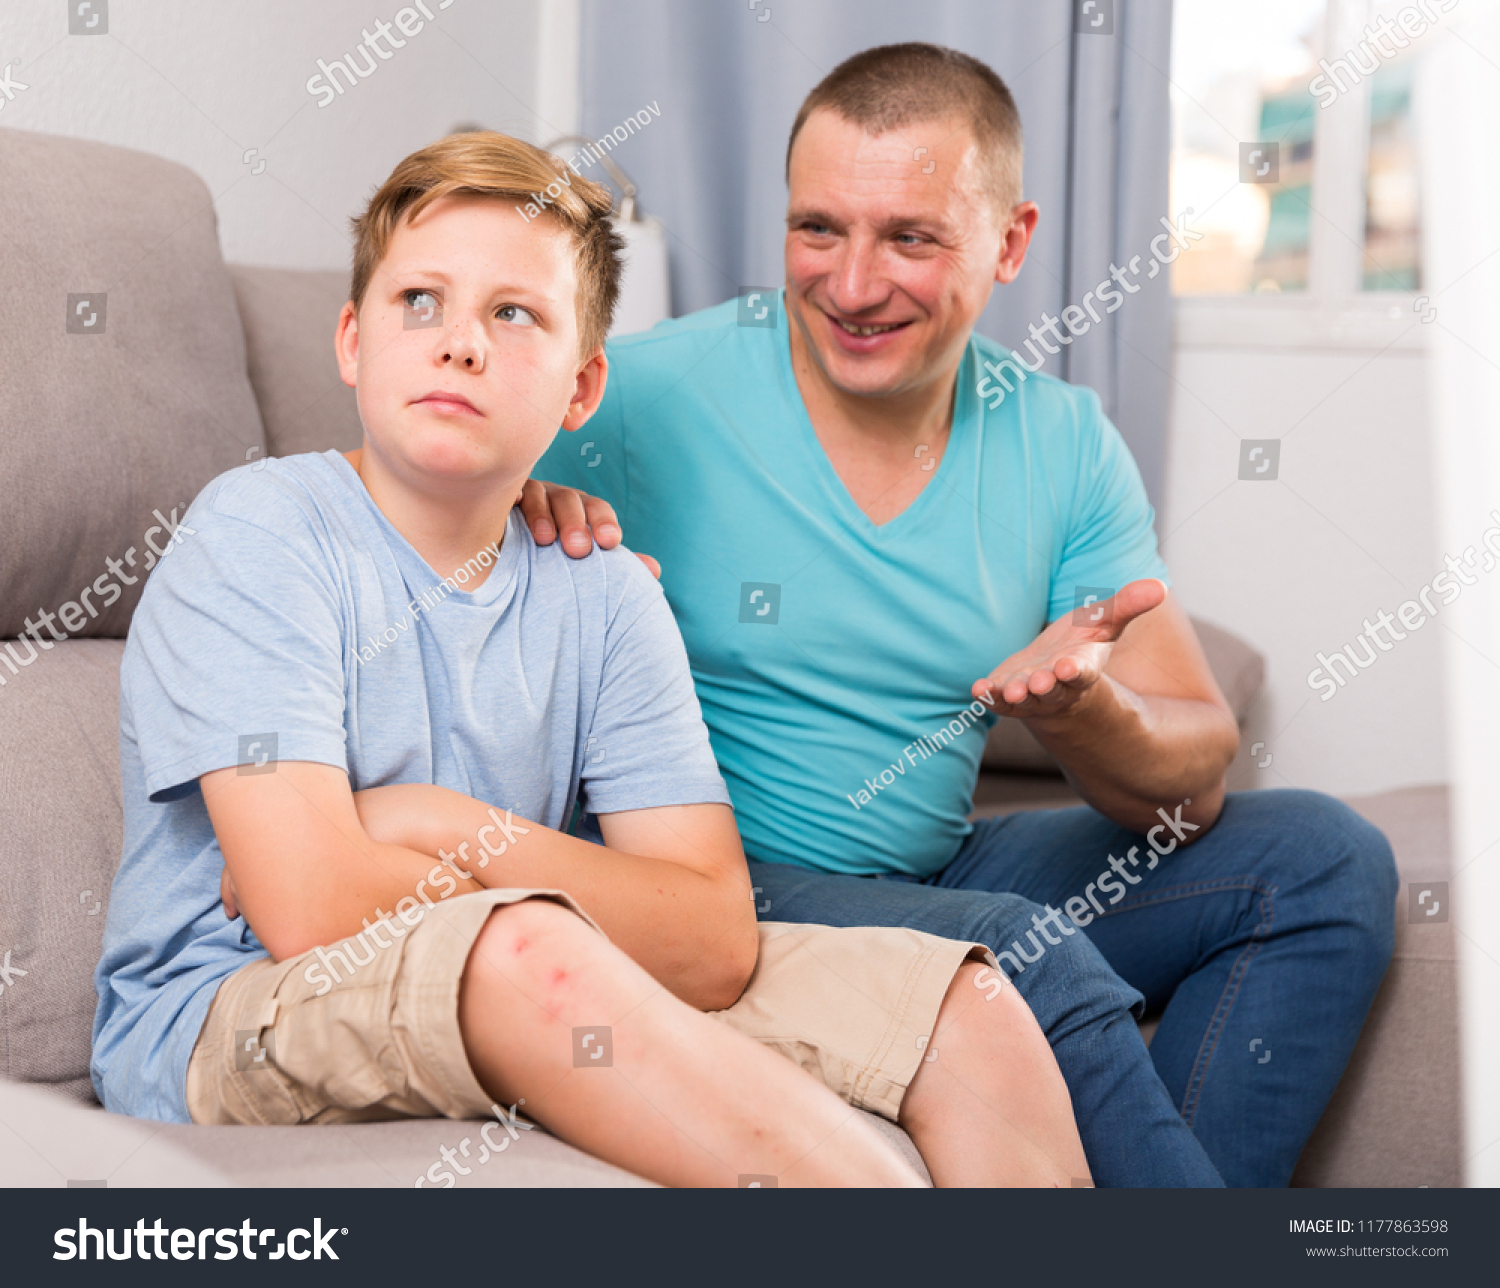 Boy is offended and father is asking for his forgiveness at the home. #1177863598